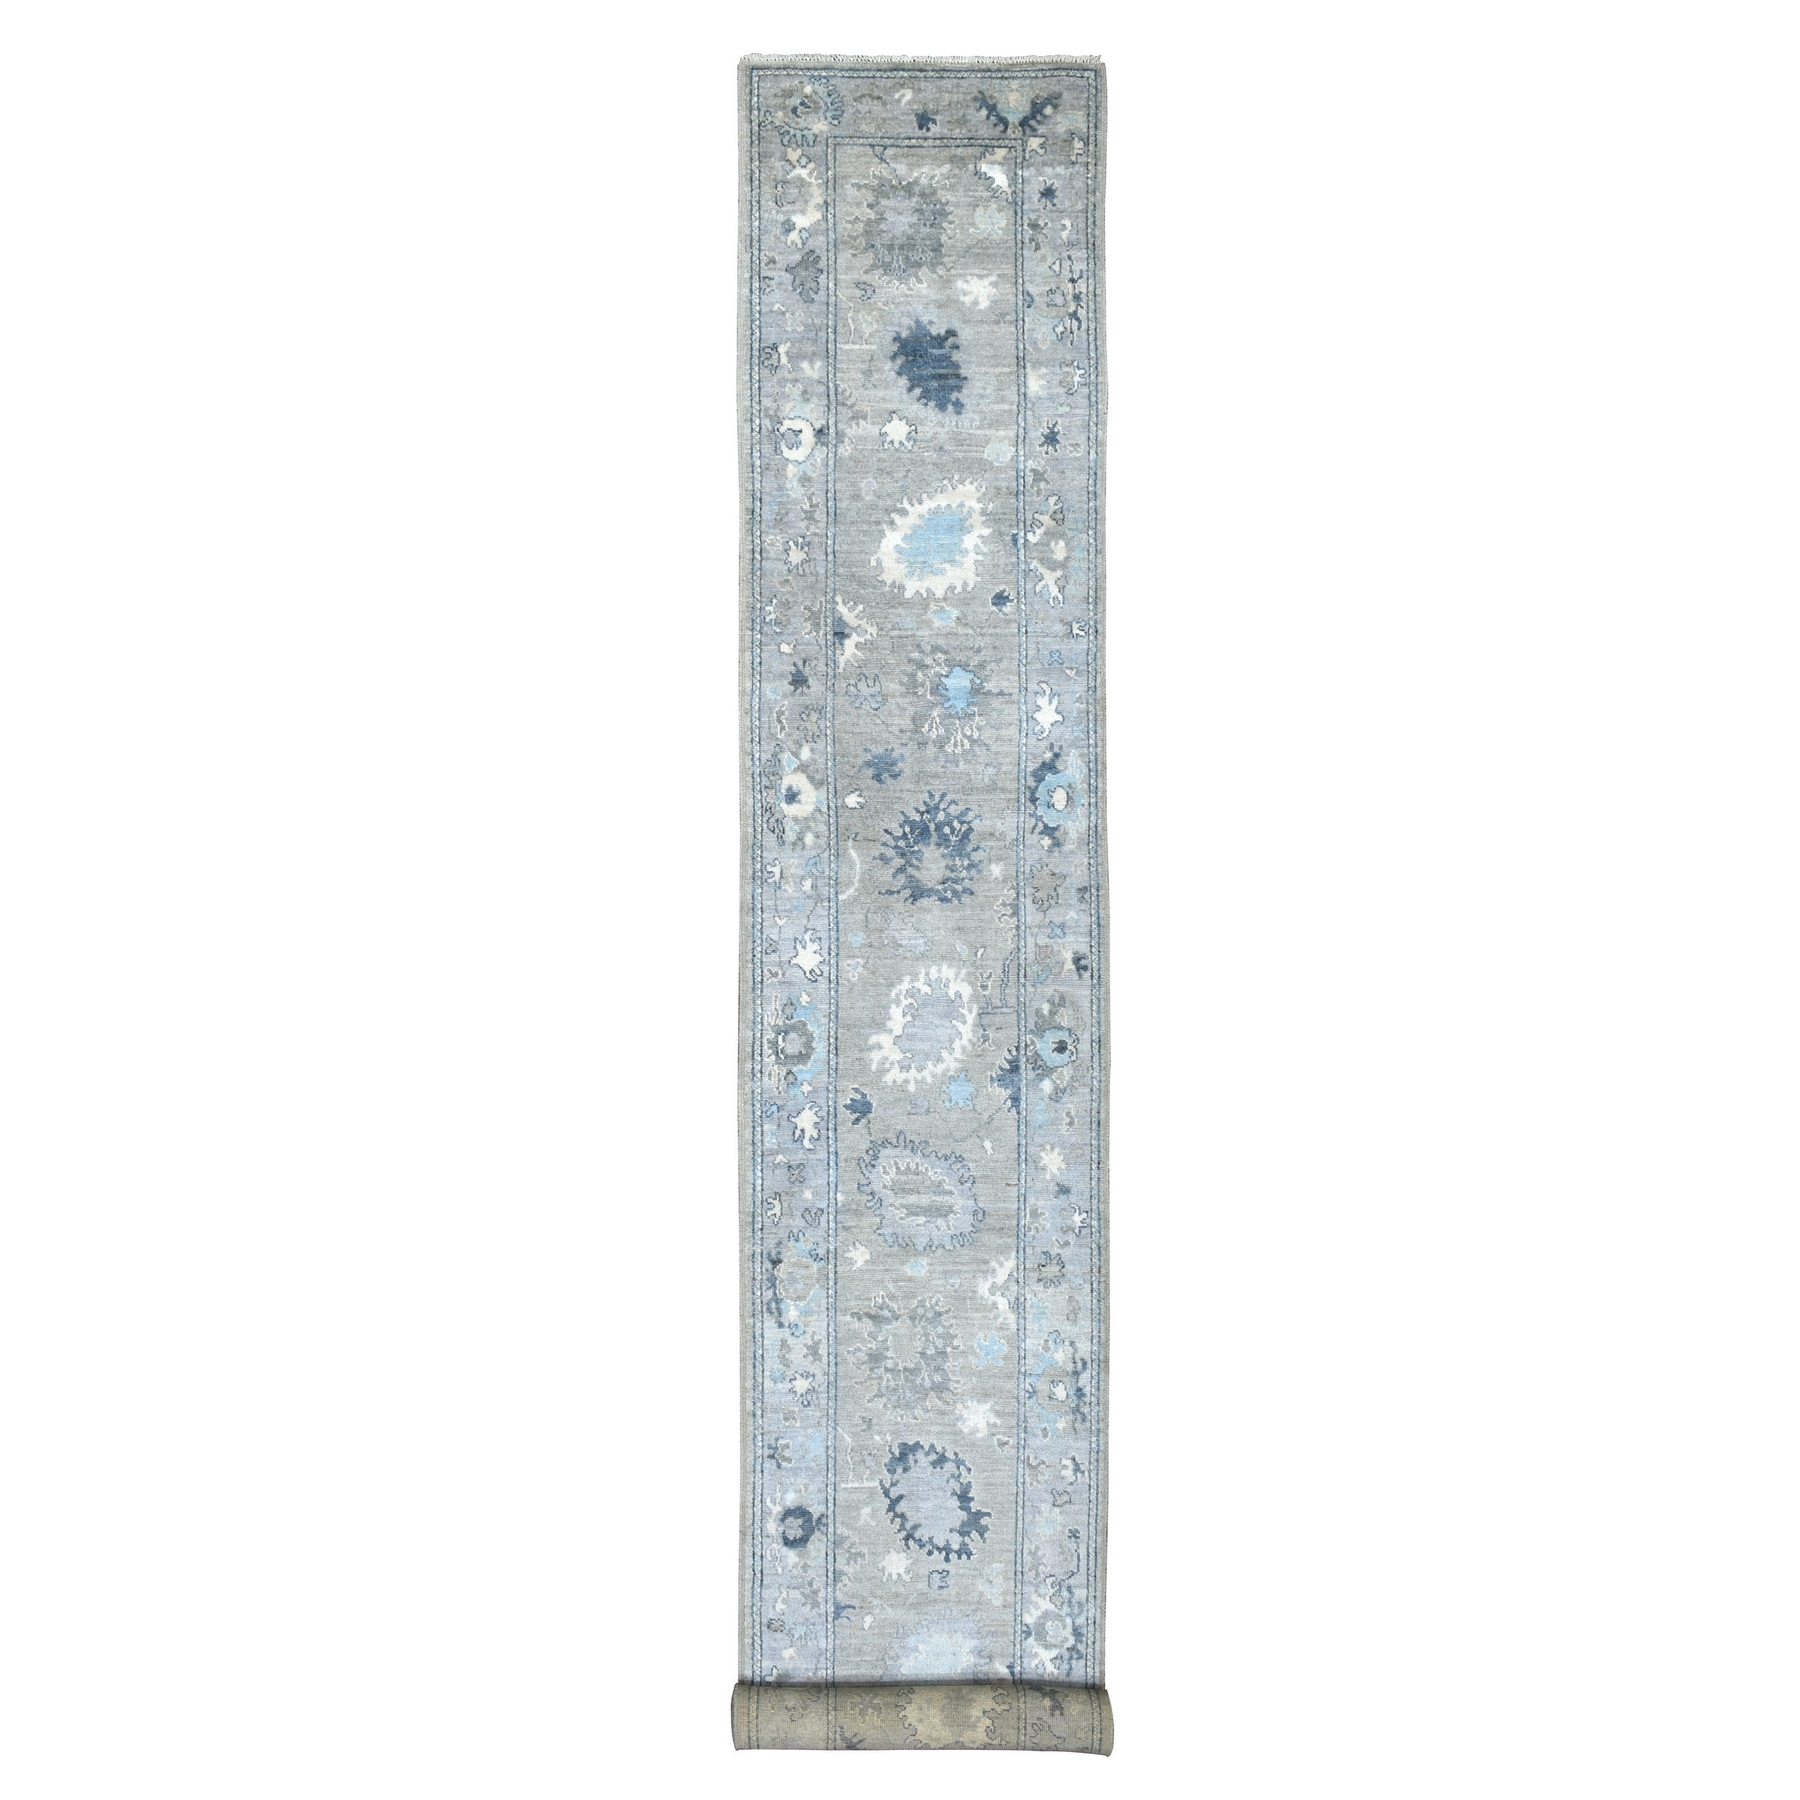 2'9"x19'6" Gray with Pop of Blue Leaf Design Angora Oushak Beautiful Hand Woven Shiny Wool Oriental XL Runner Rug 